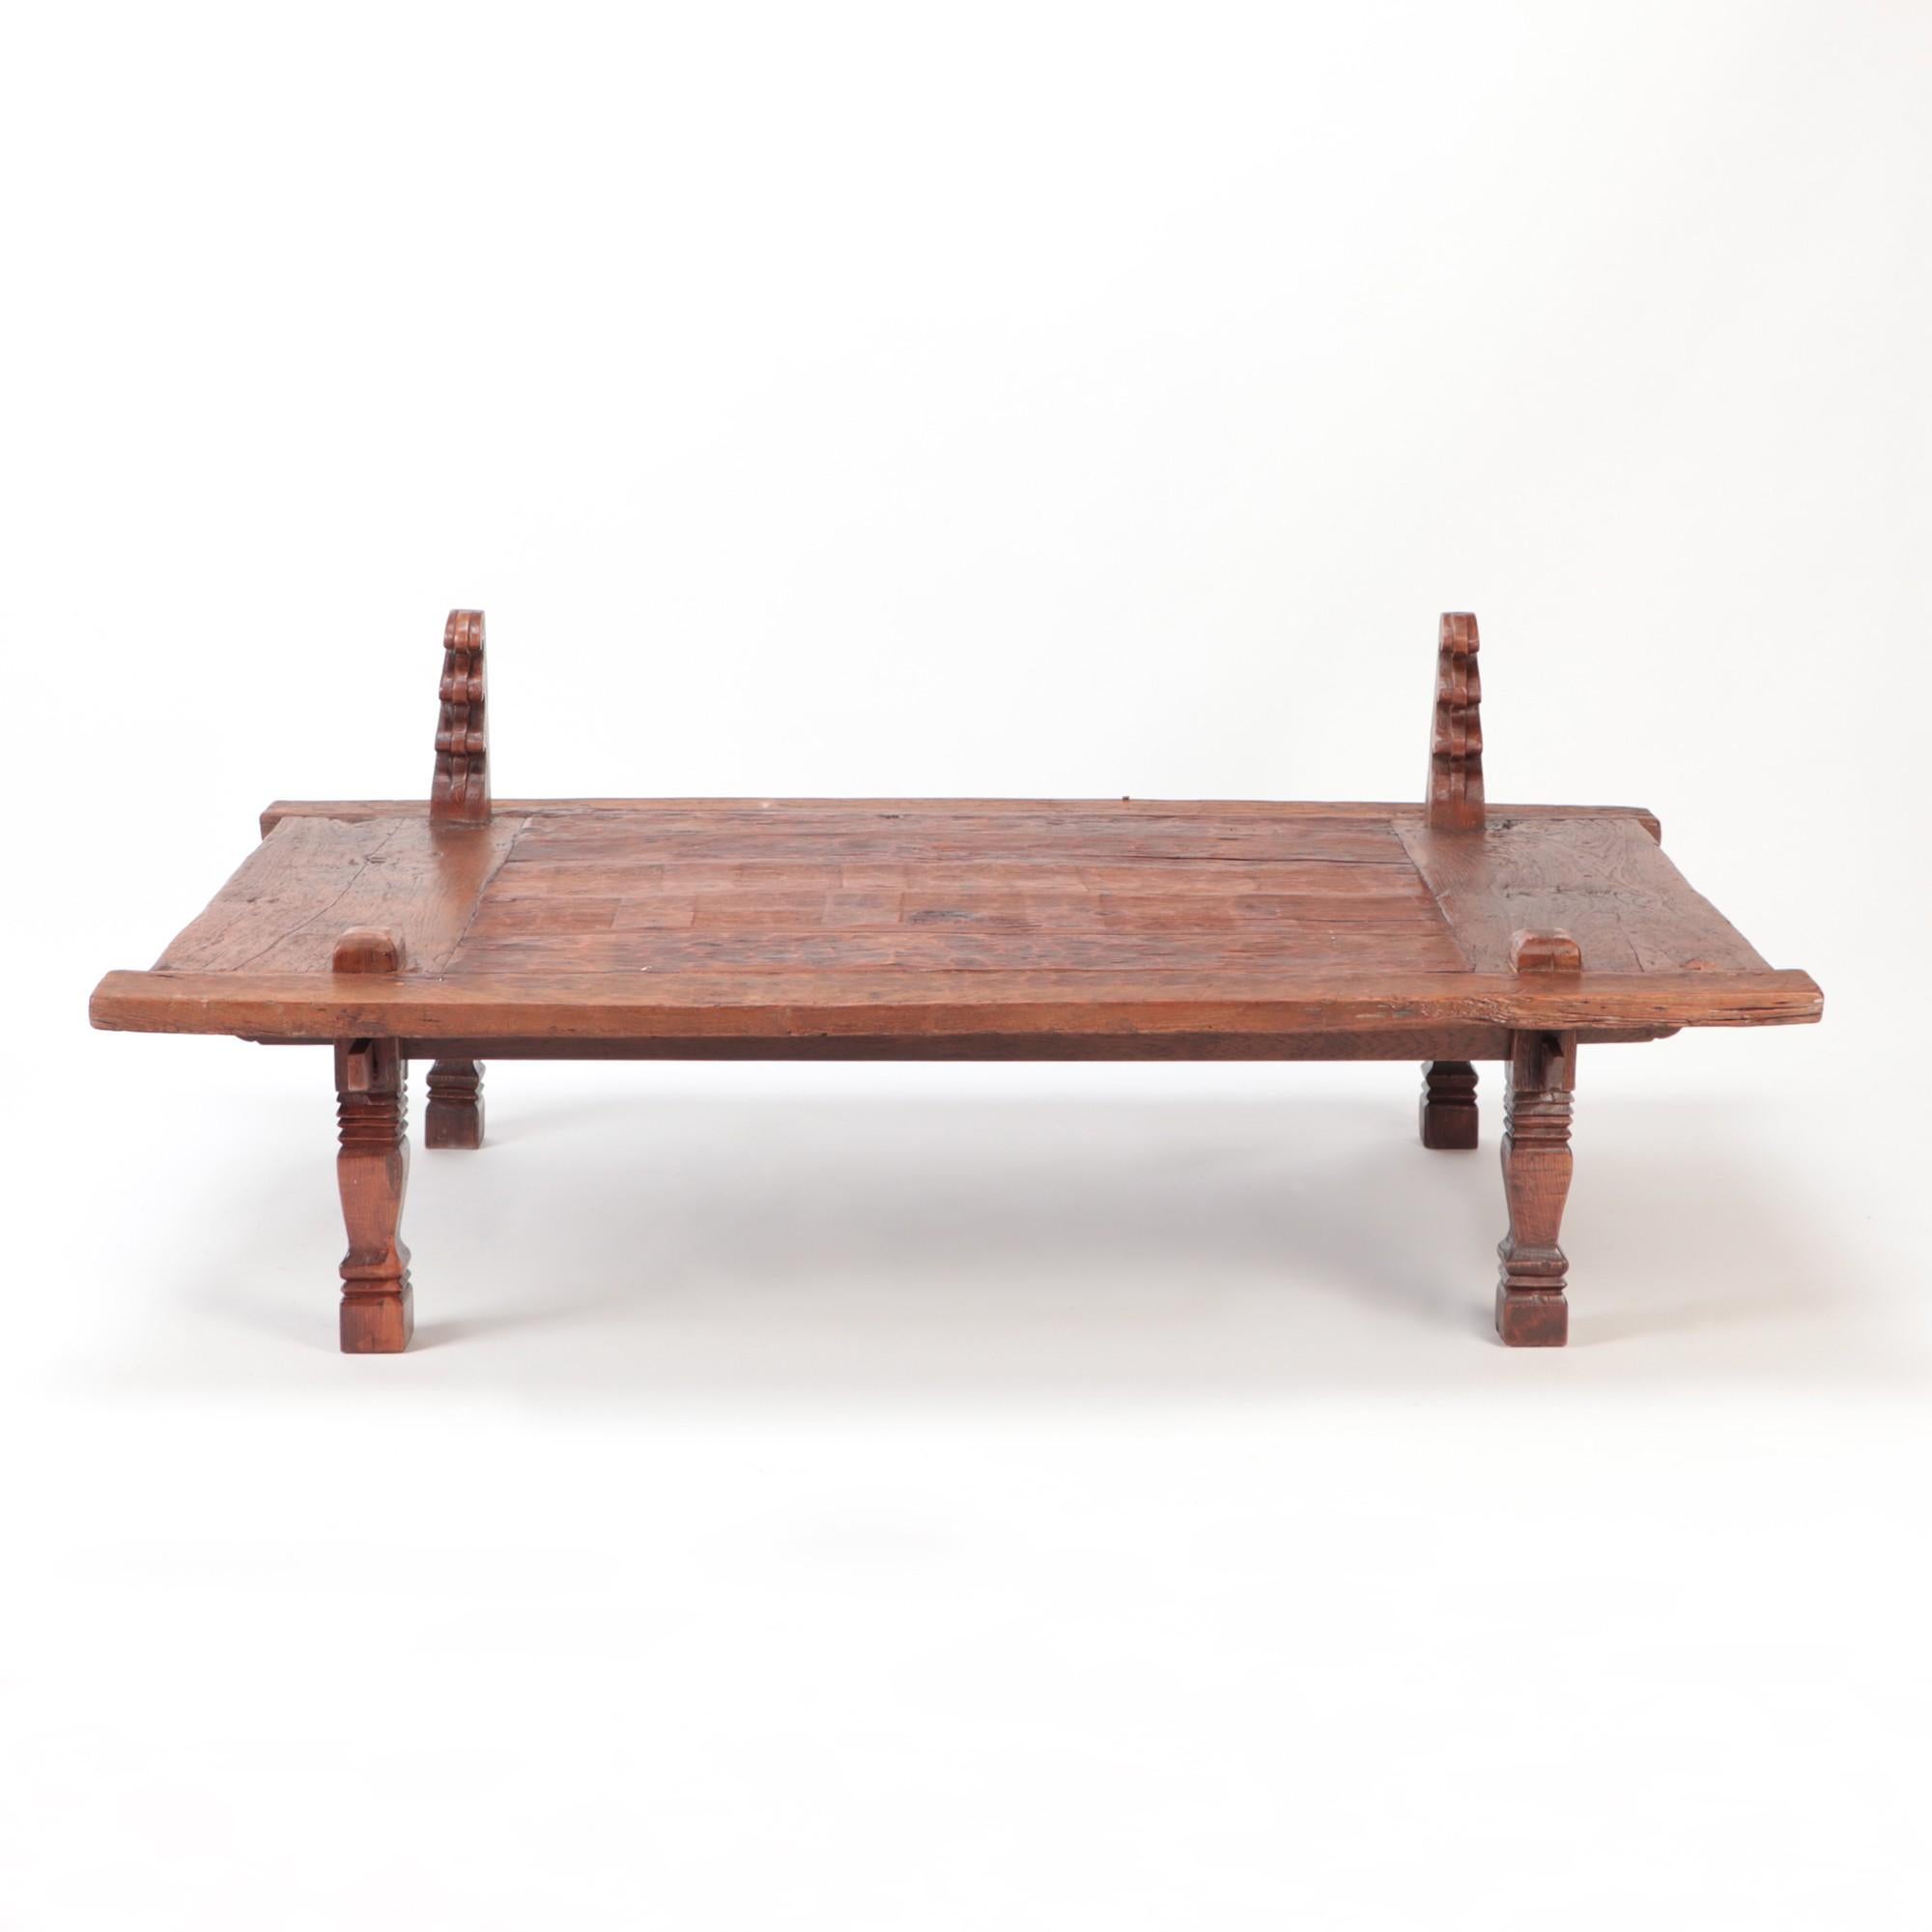 19th Century Indonesian coffee table authentically known as a sewing table. Made from solid teak, hand chiseled and hand carved. With a waxed finish.